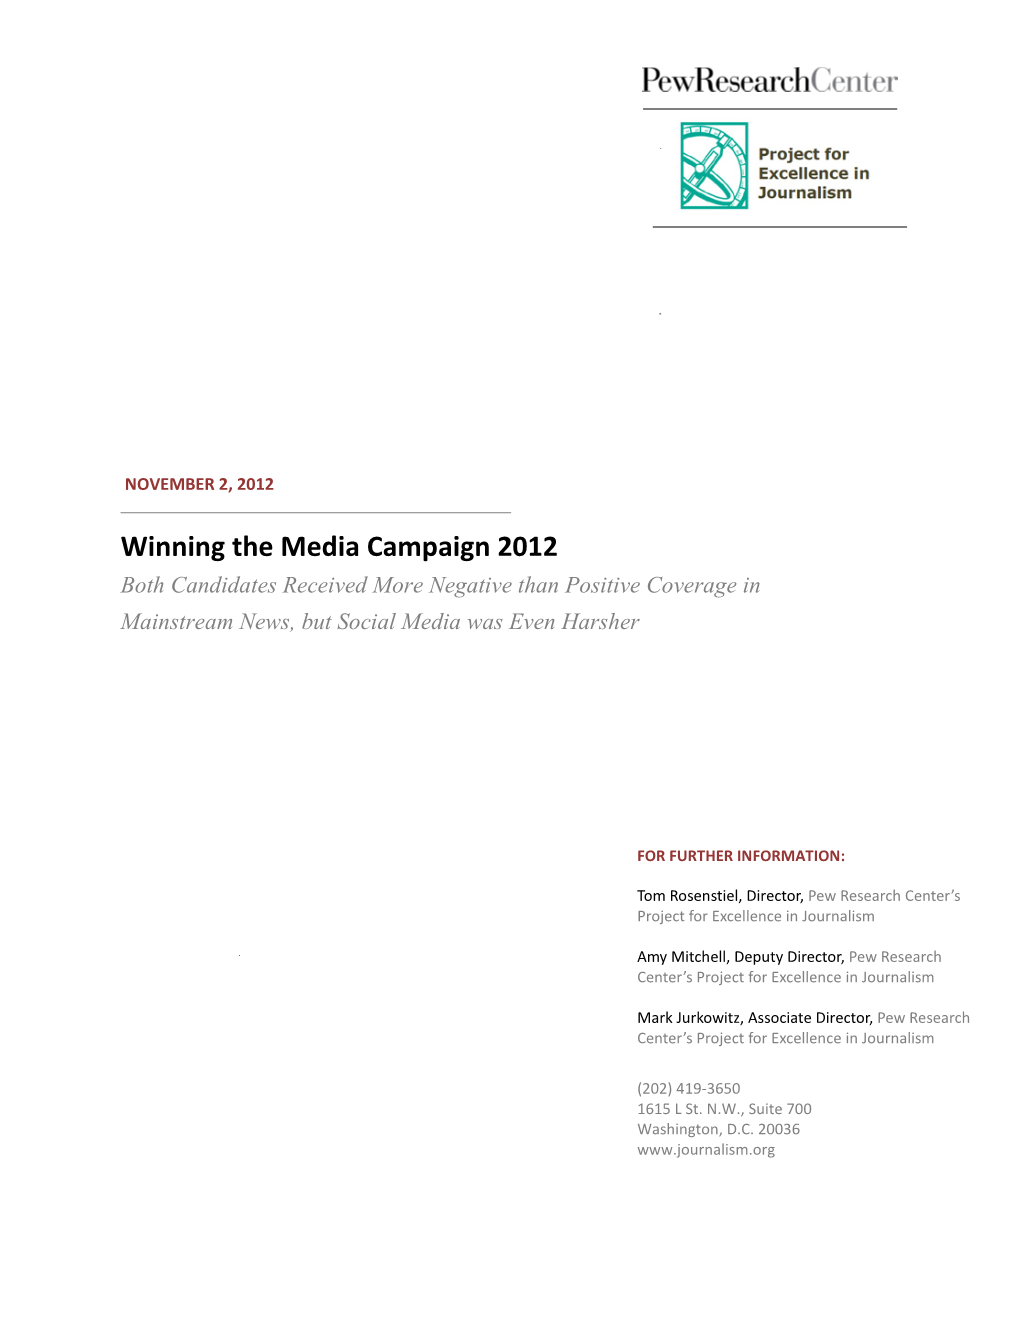 Winning the Media Campaign 2012 Both Candidates Received More Negative Than Positive Coverage in Mainstream News, but Social Media Was Even Harsher